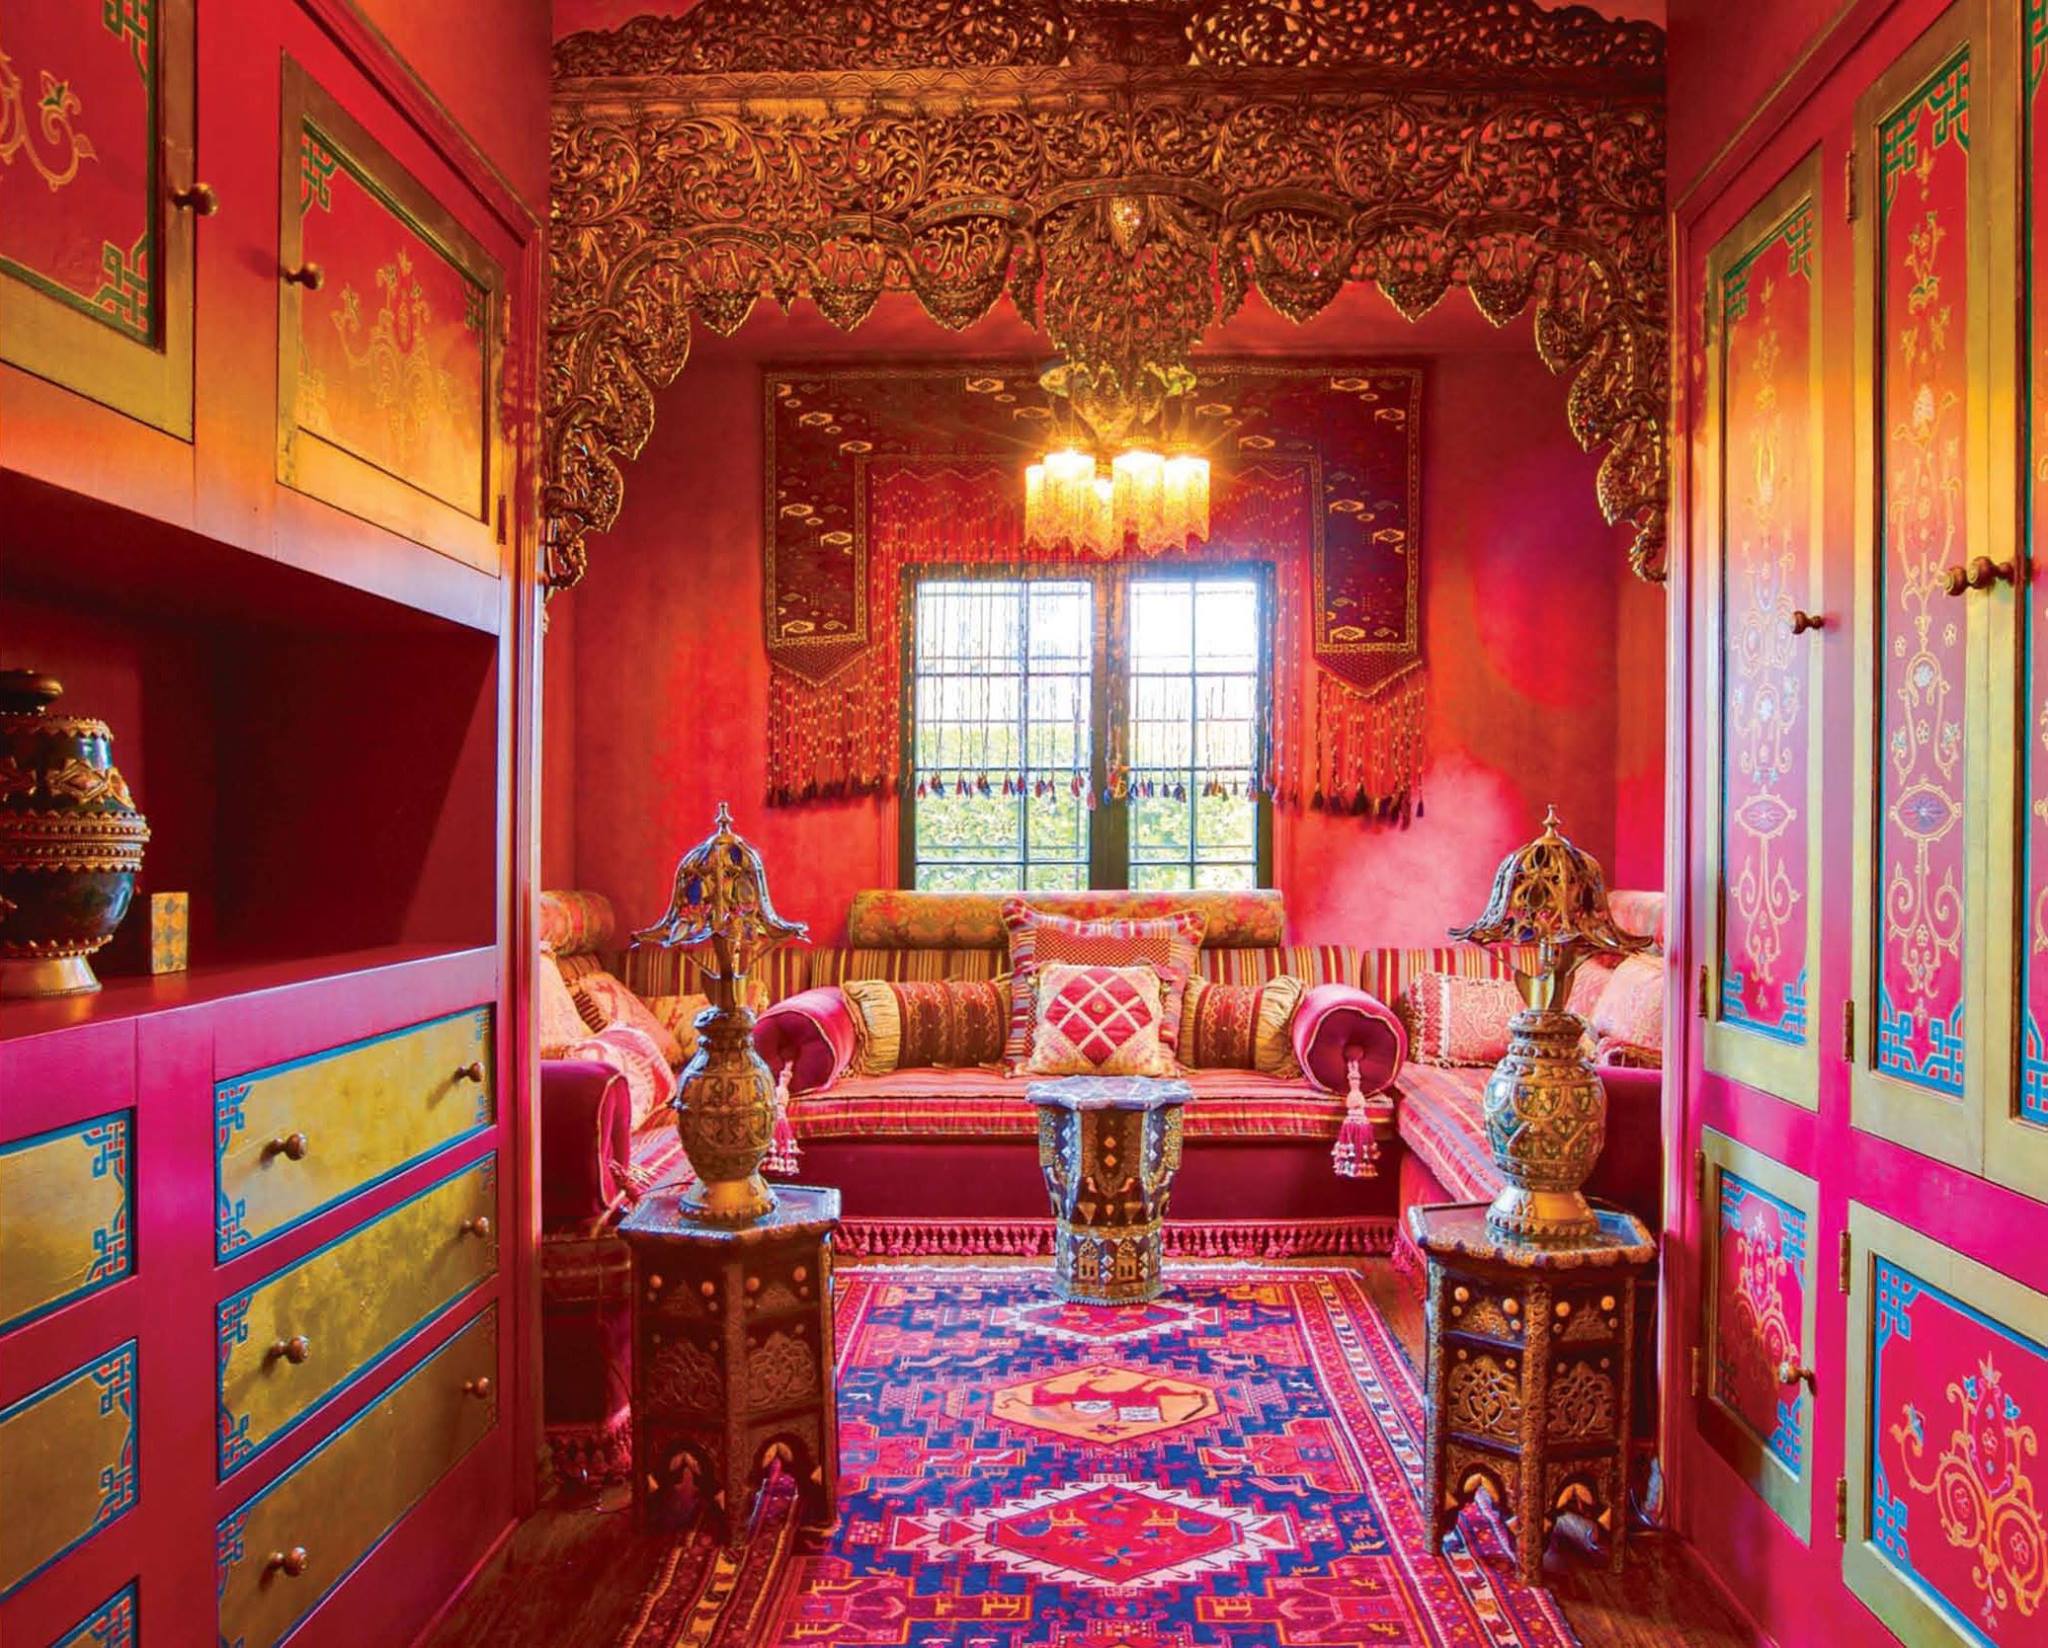 The Moroccan Sitting Room of the Jimi Hendrix Suite at The Cedars Photo by Daniel Messier